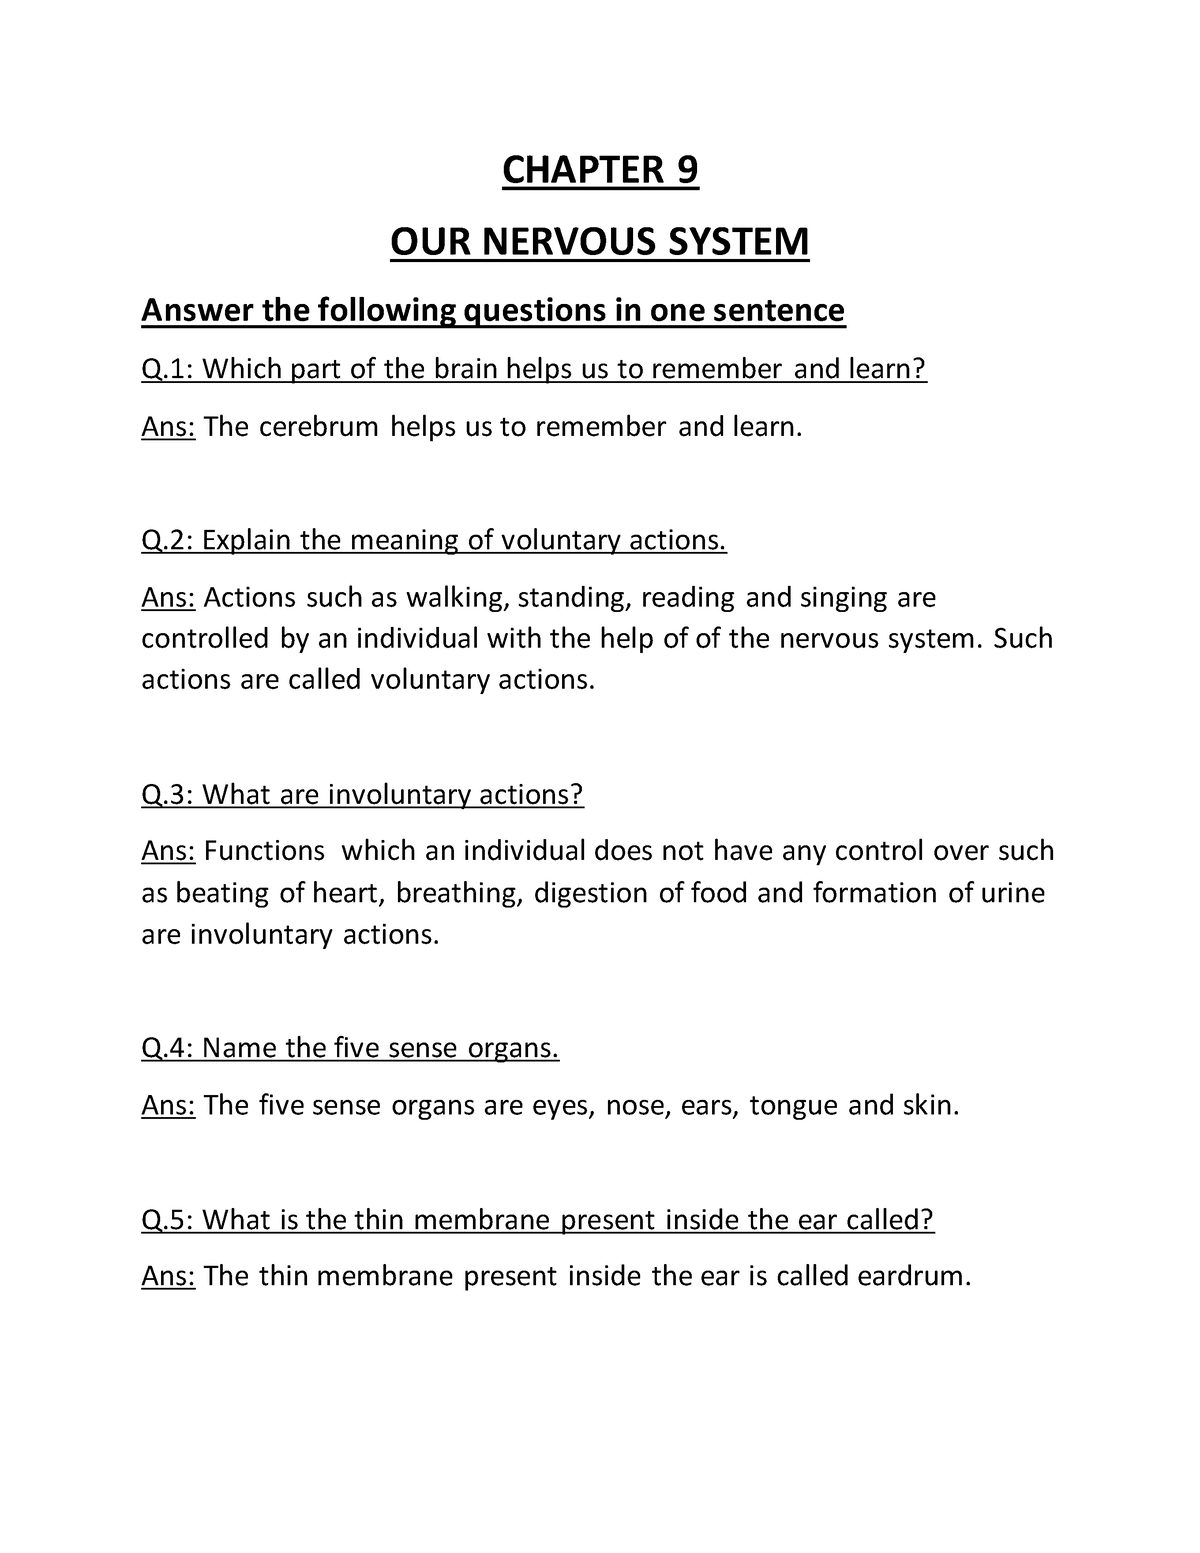 case study questions on nervous system